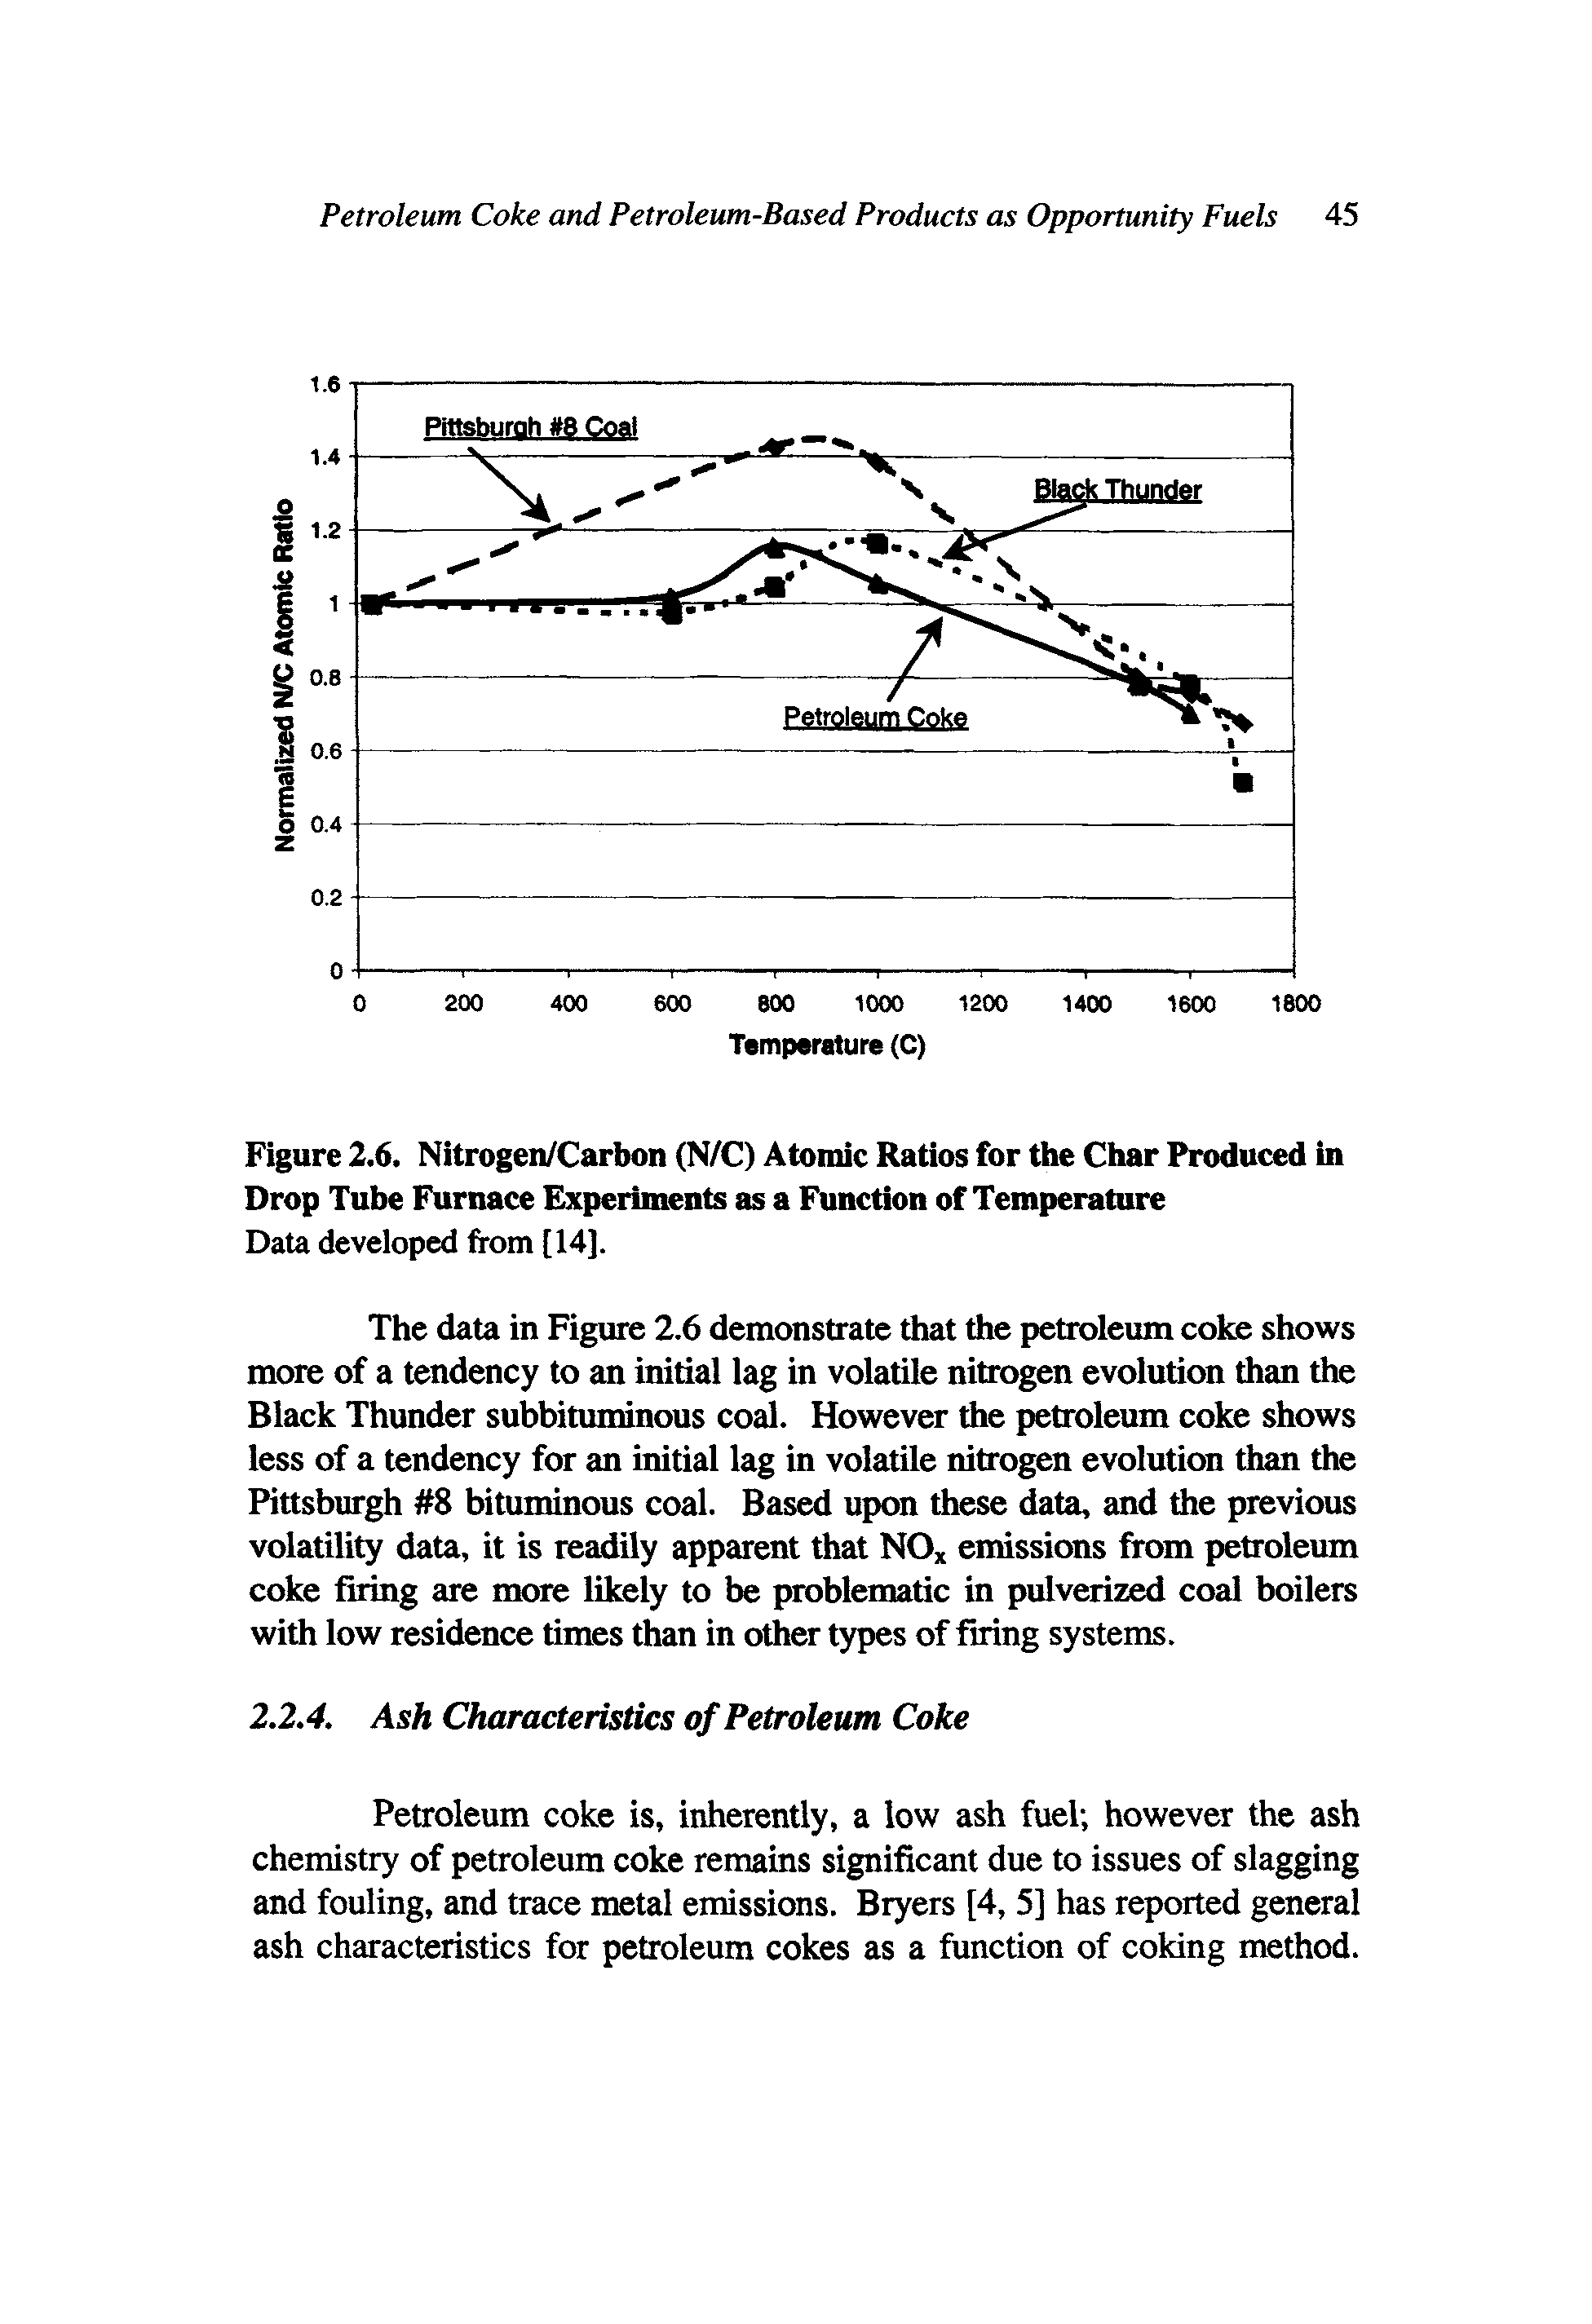 Figure 2.6. Nitrogen/Carbon (N/C) Atomic Ratios for the Char Produced in Drop Tube Furnace Experiments as a Function of Temperature...